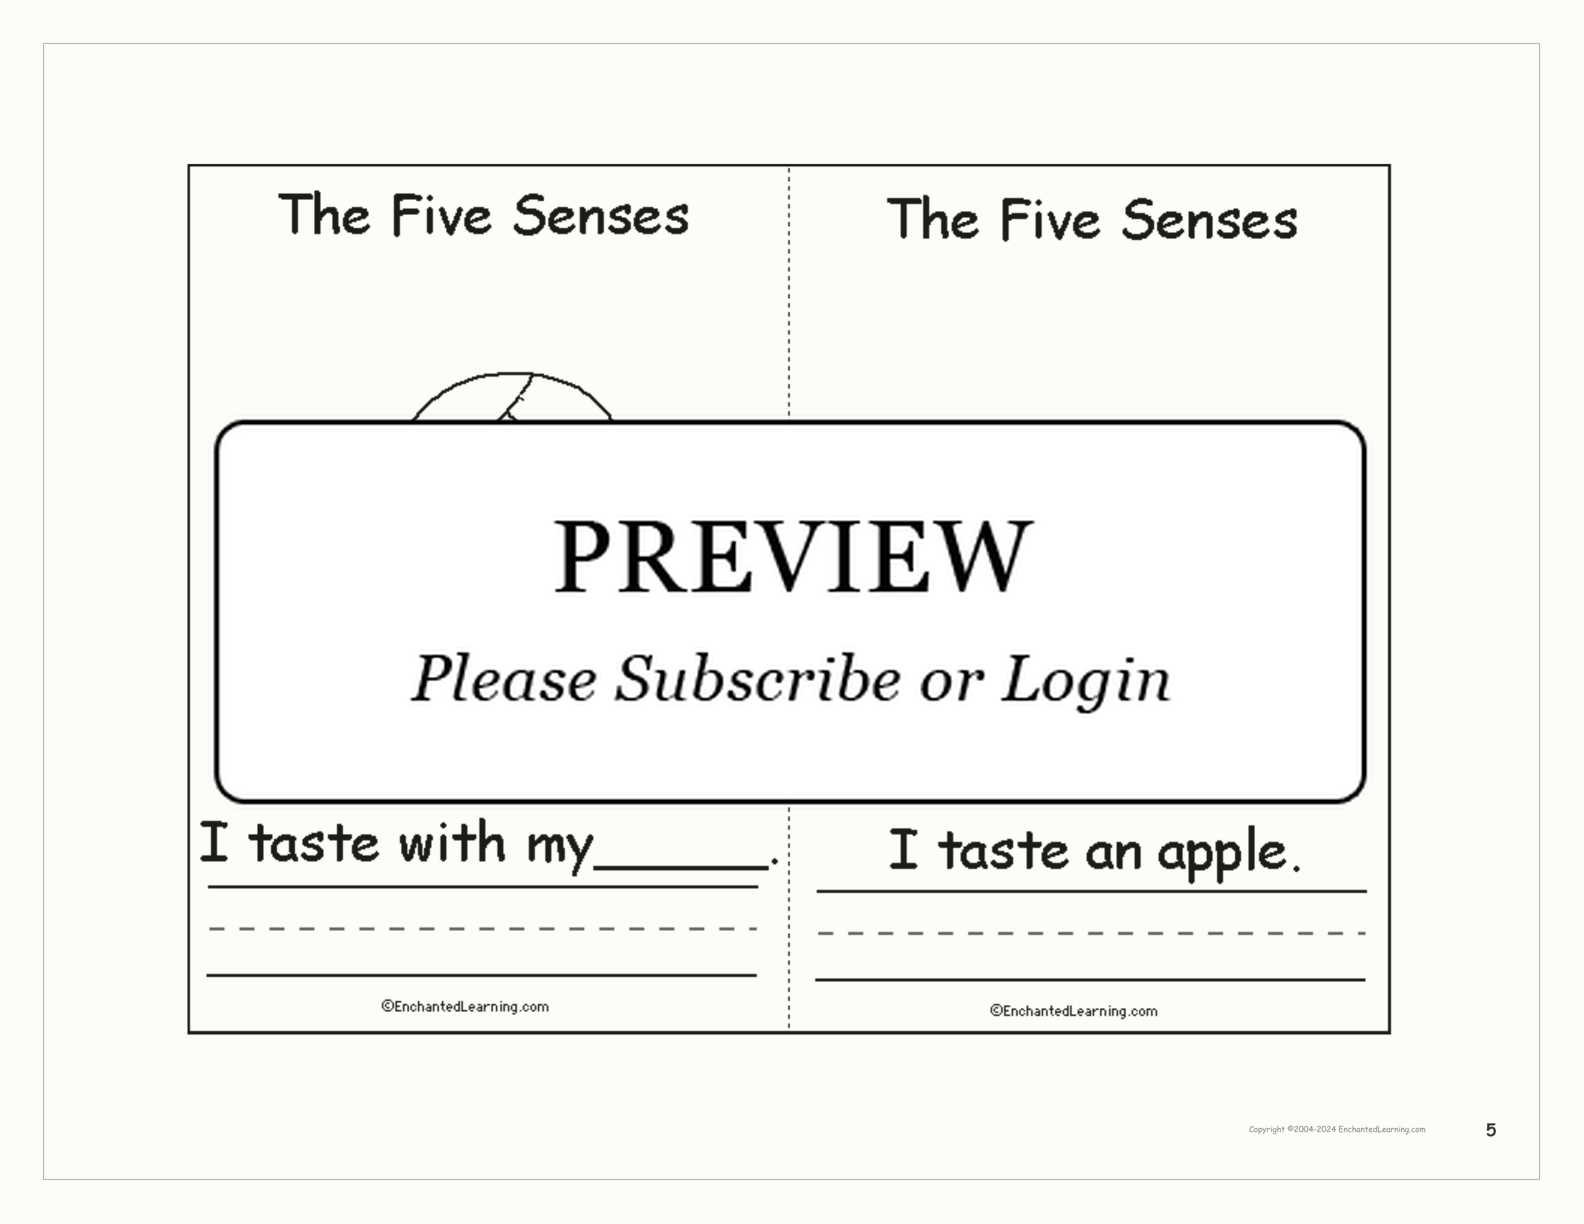 The Five Senses - Printable Book interactive worksheet page 5